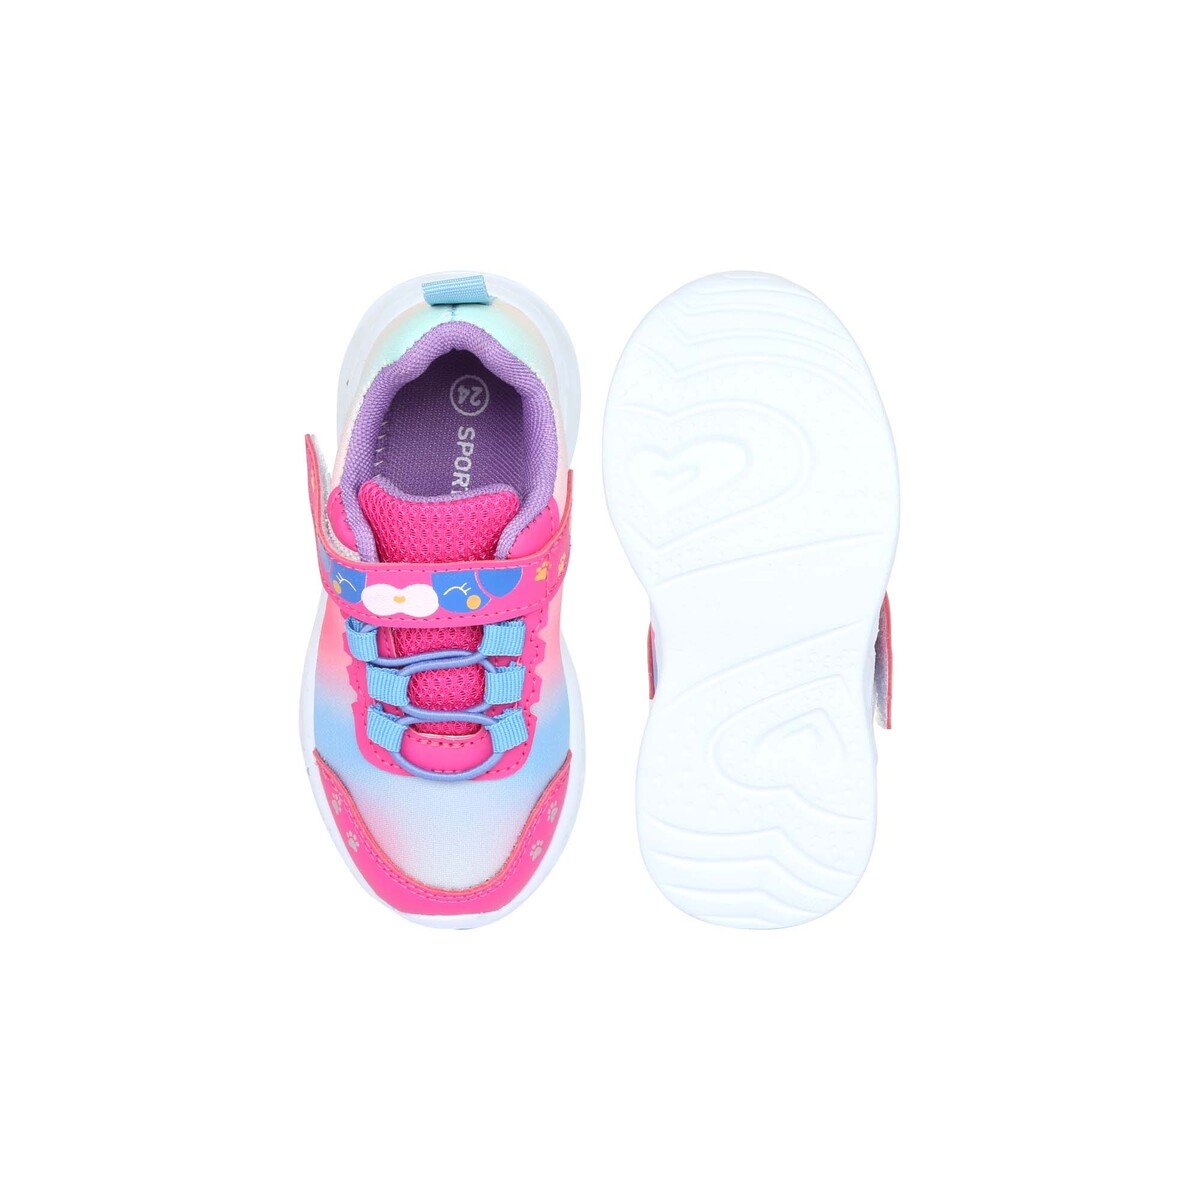 Sports Inc Baby Girl Shoes with Light KL85702 Fuchsia, 25